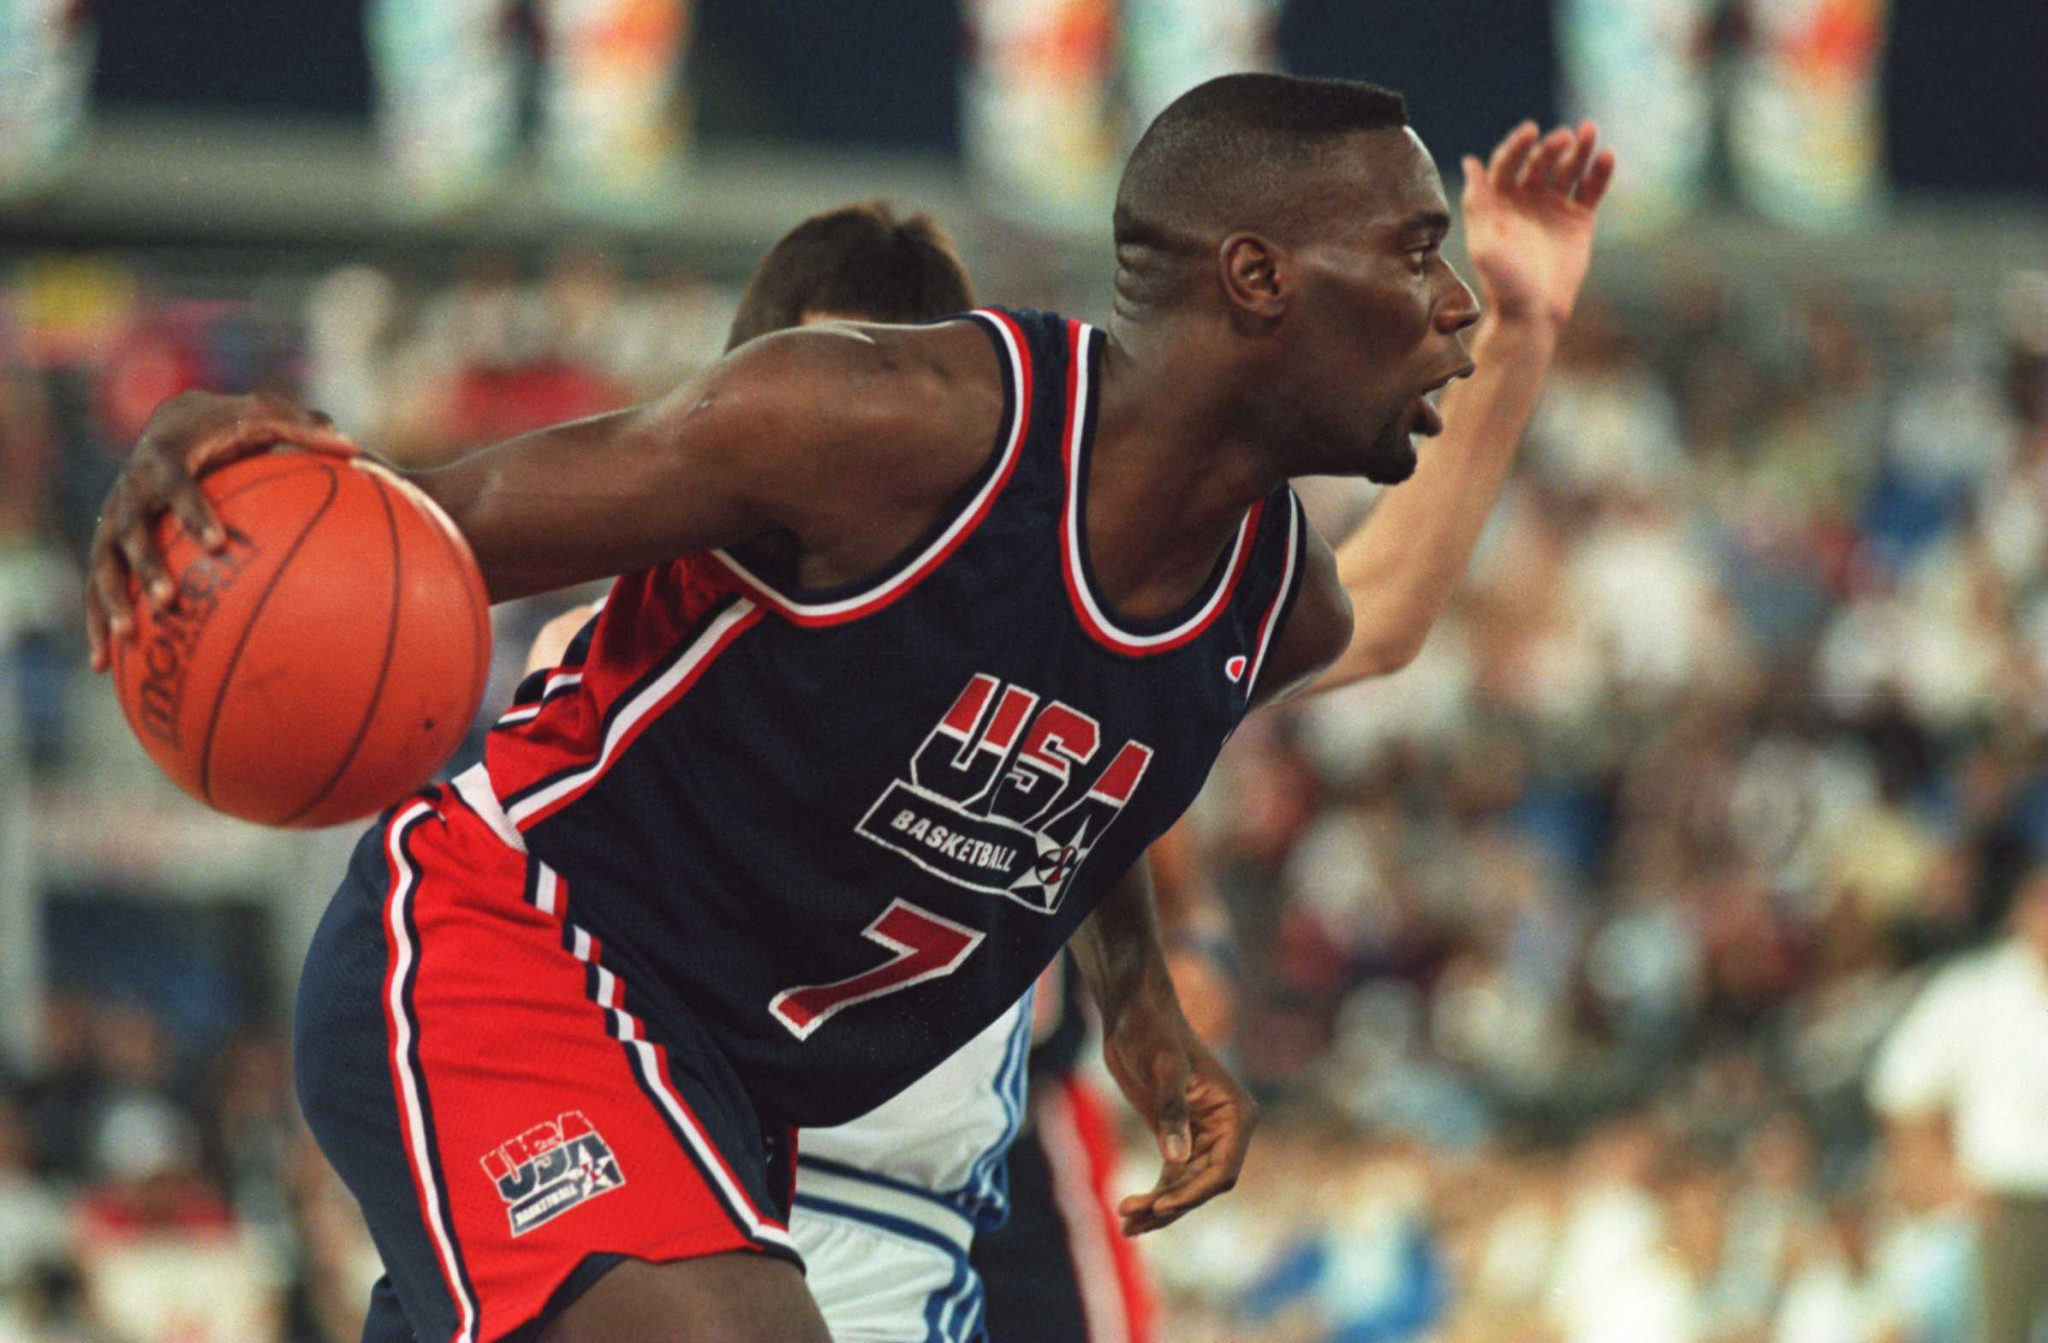 Shawn Kemp won a gold with the United States during the 1994 FIBA World Championships in Canada ©Getty Images